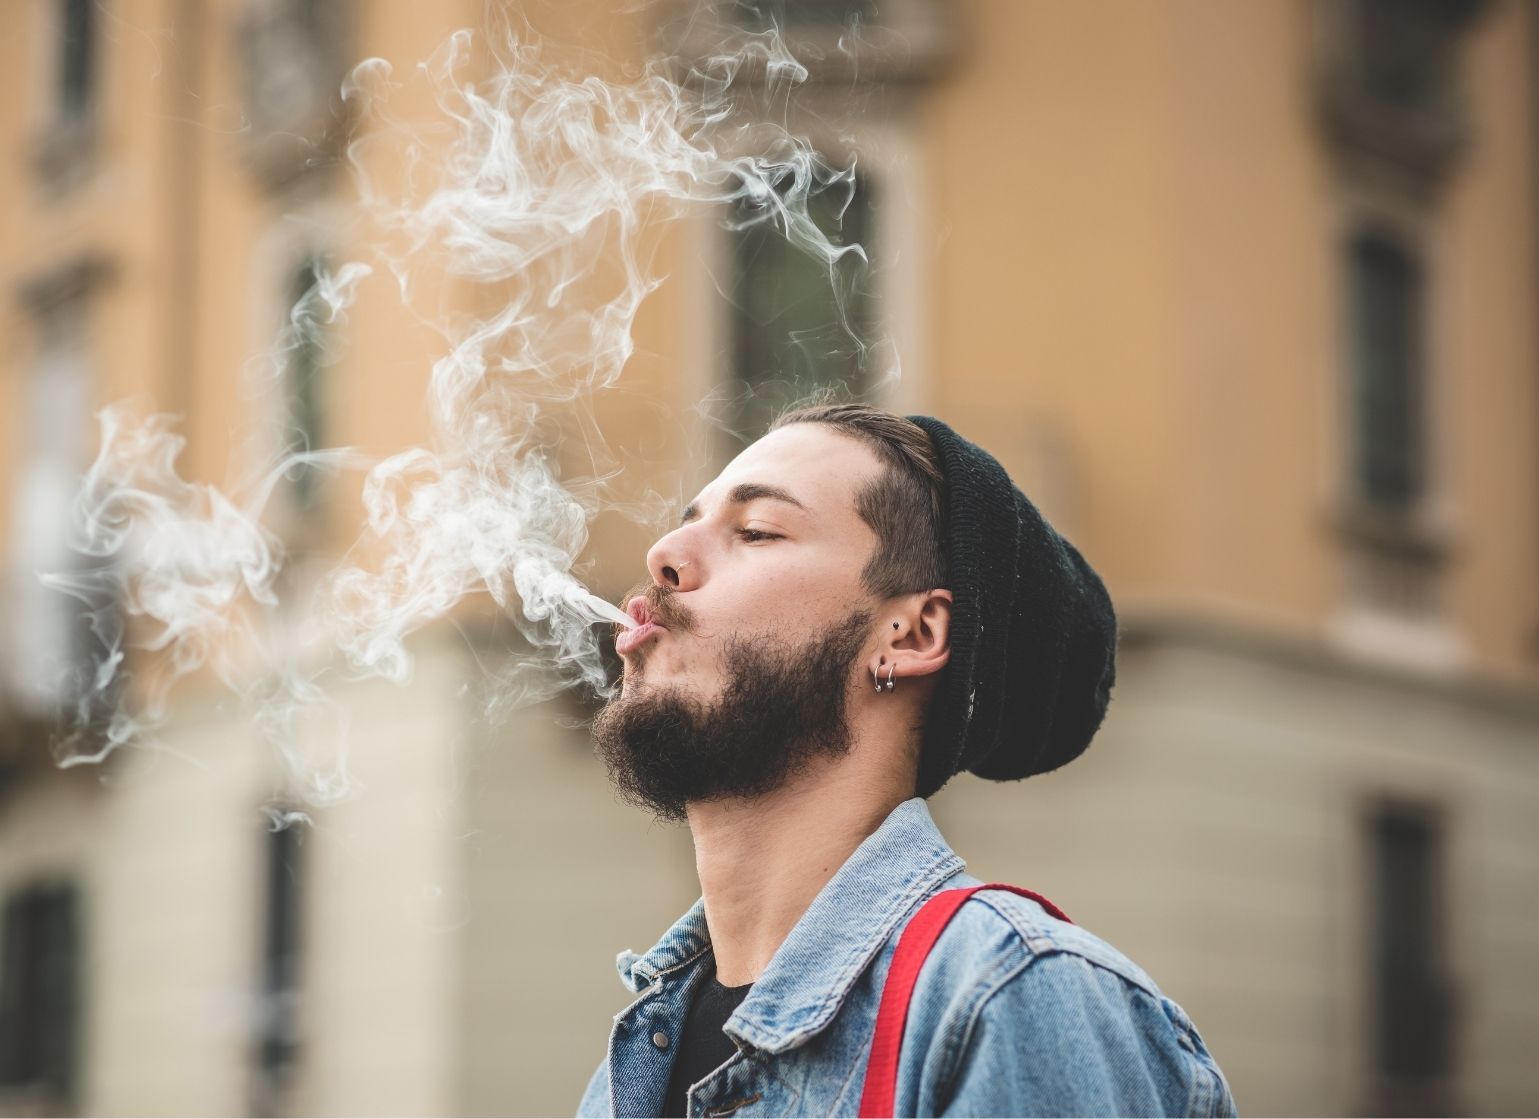 Does Smoking Cause Hair Loss? Myths or Reality